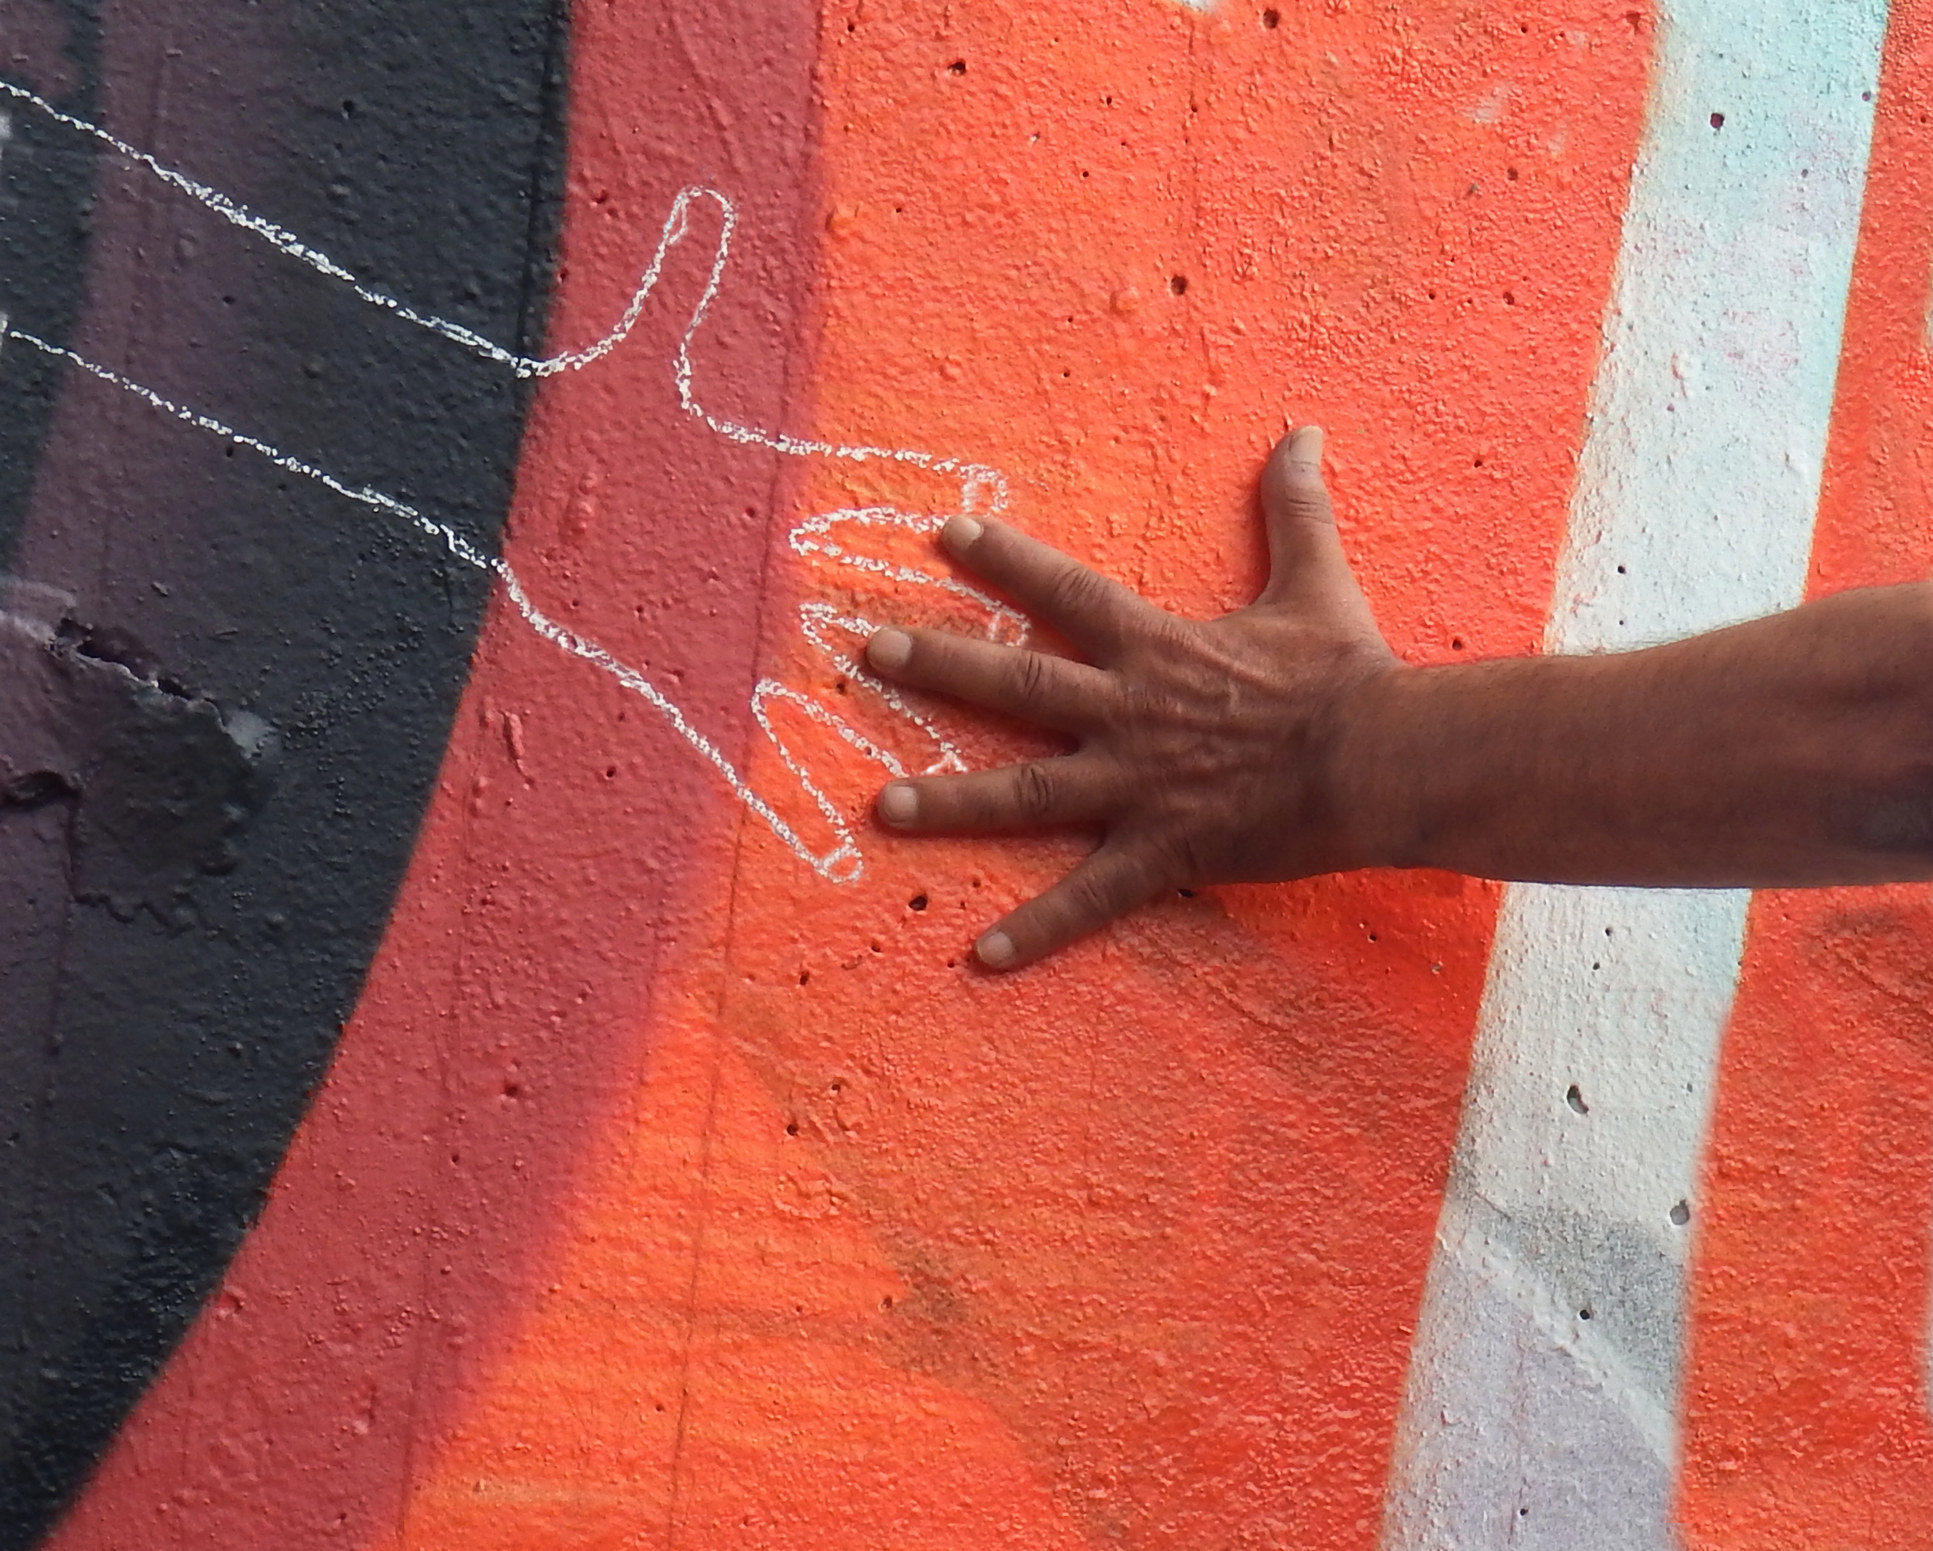 A hand touches a chalk outline of a hand